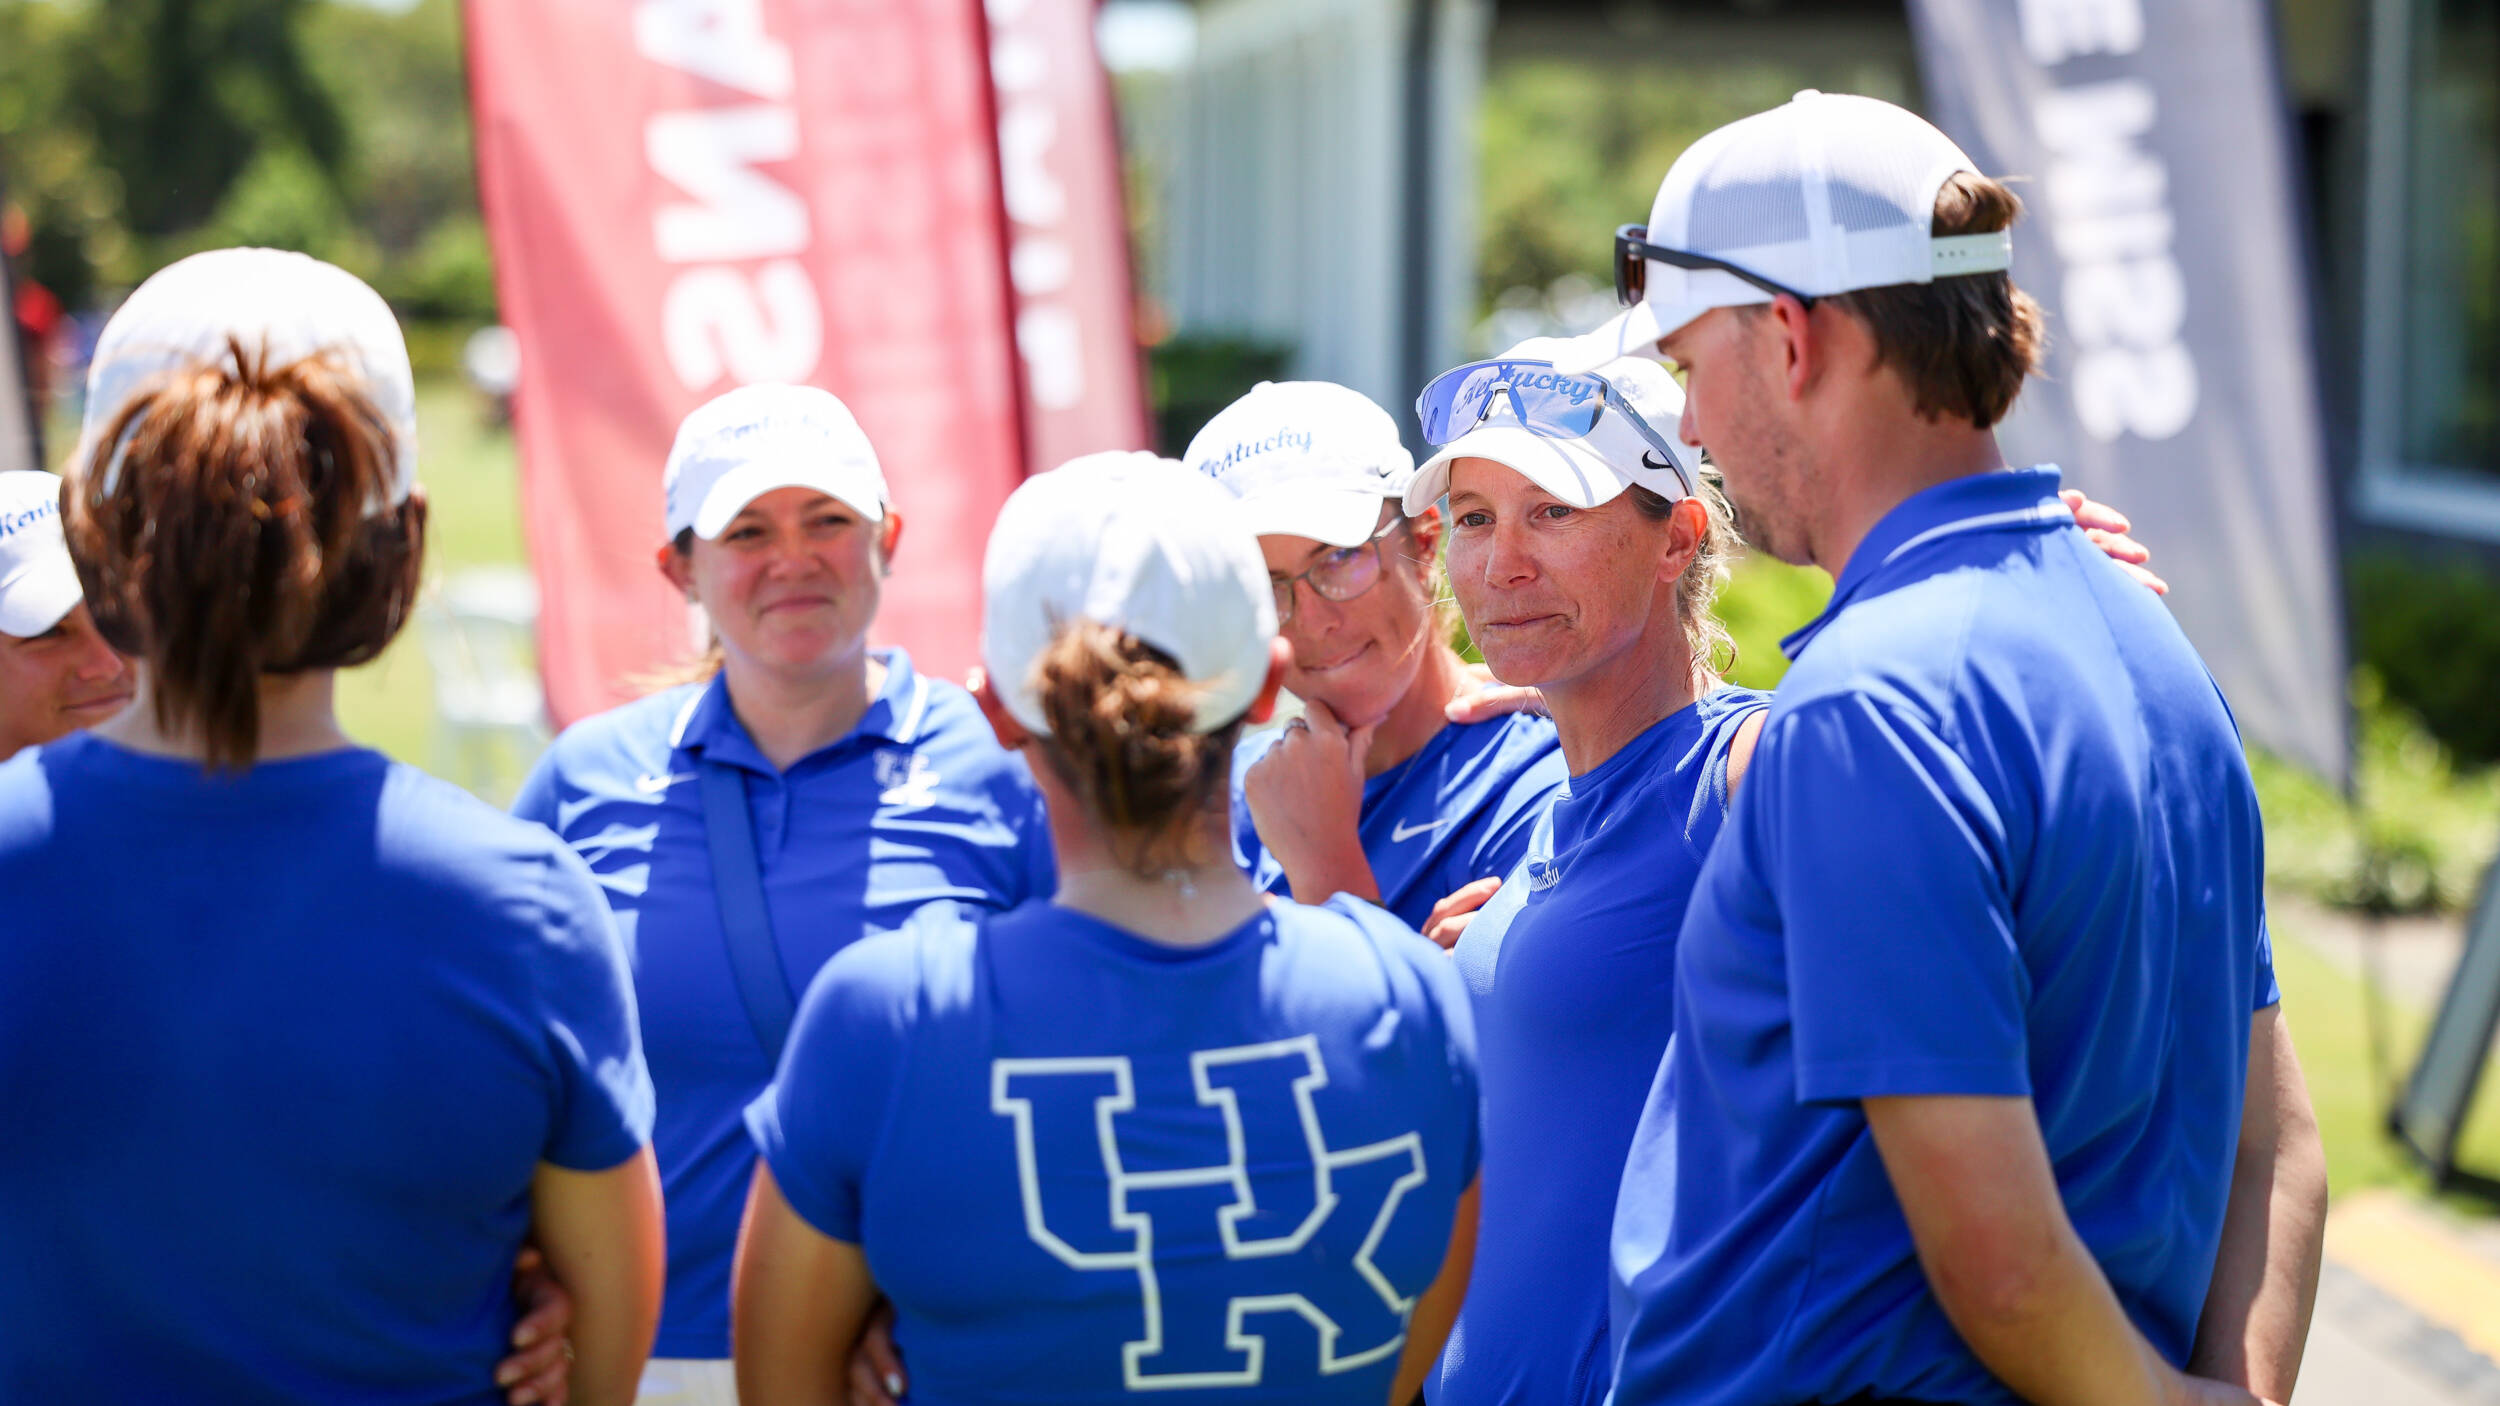 UK Advances to Match Play at SEC Championship, Laney Frye Claims Third Place in 70-Person Field